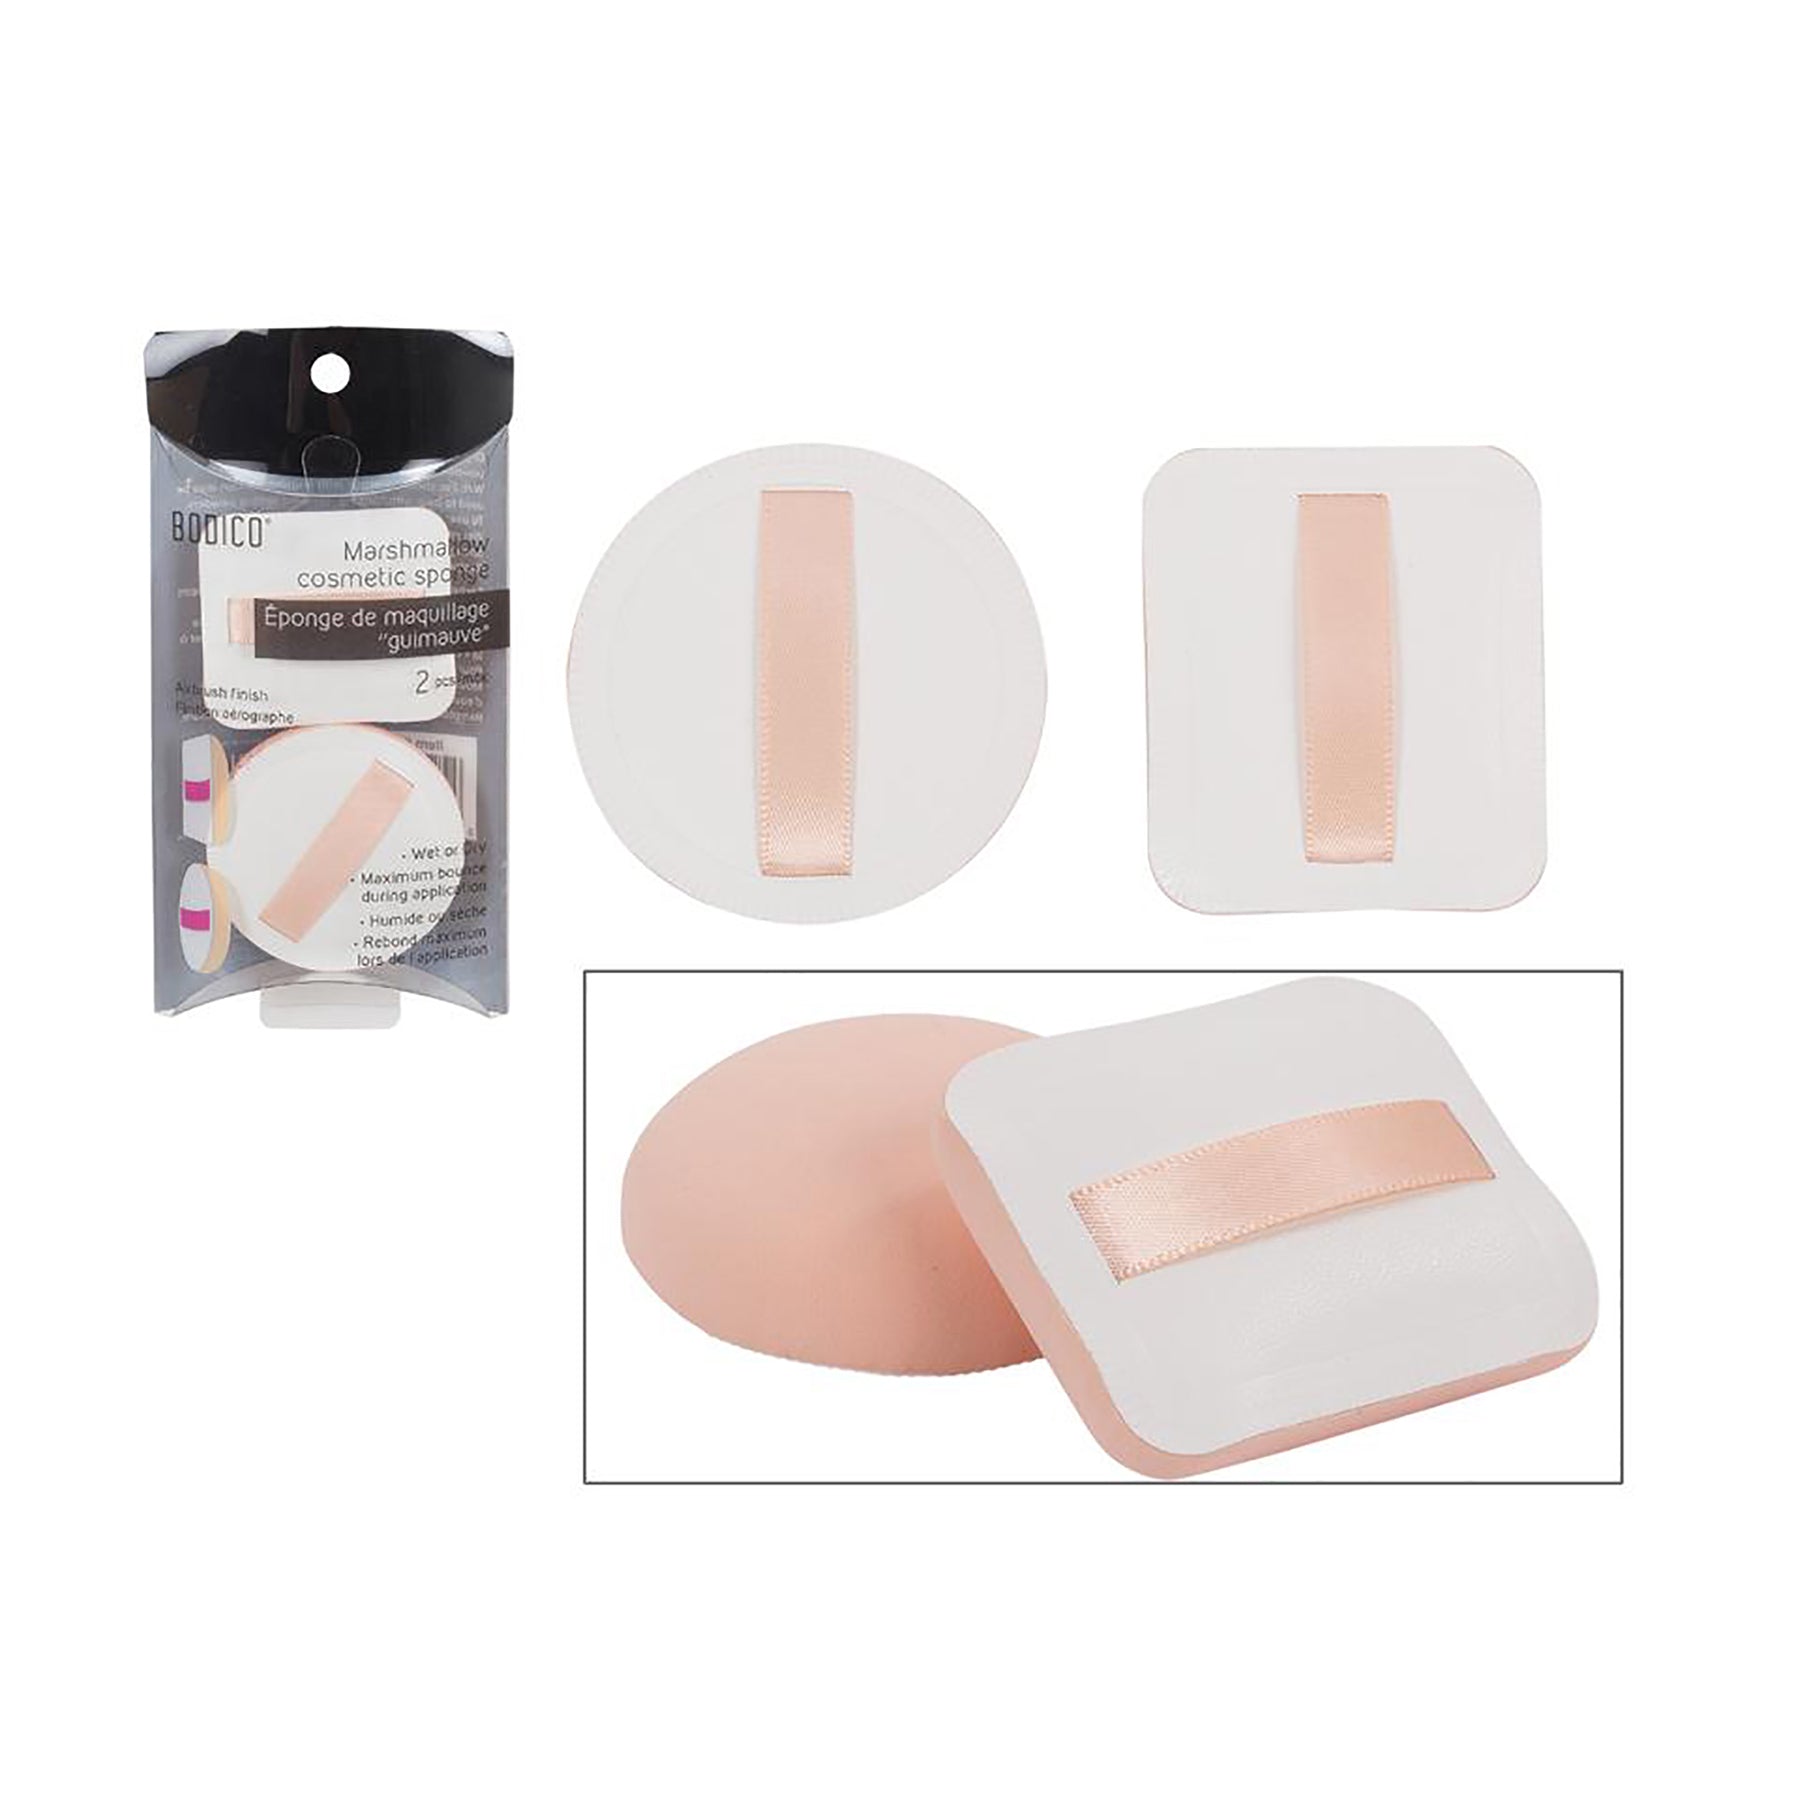 Bodico 2 Cosmetic Sponges Marshmallow Round 2.25in Square 2x1.75in